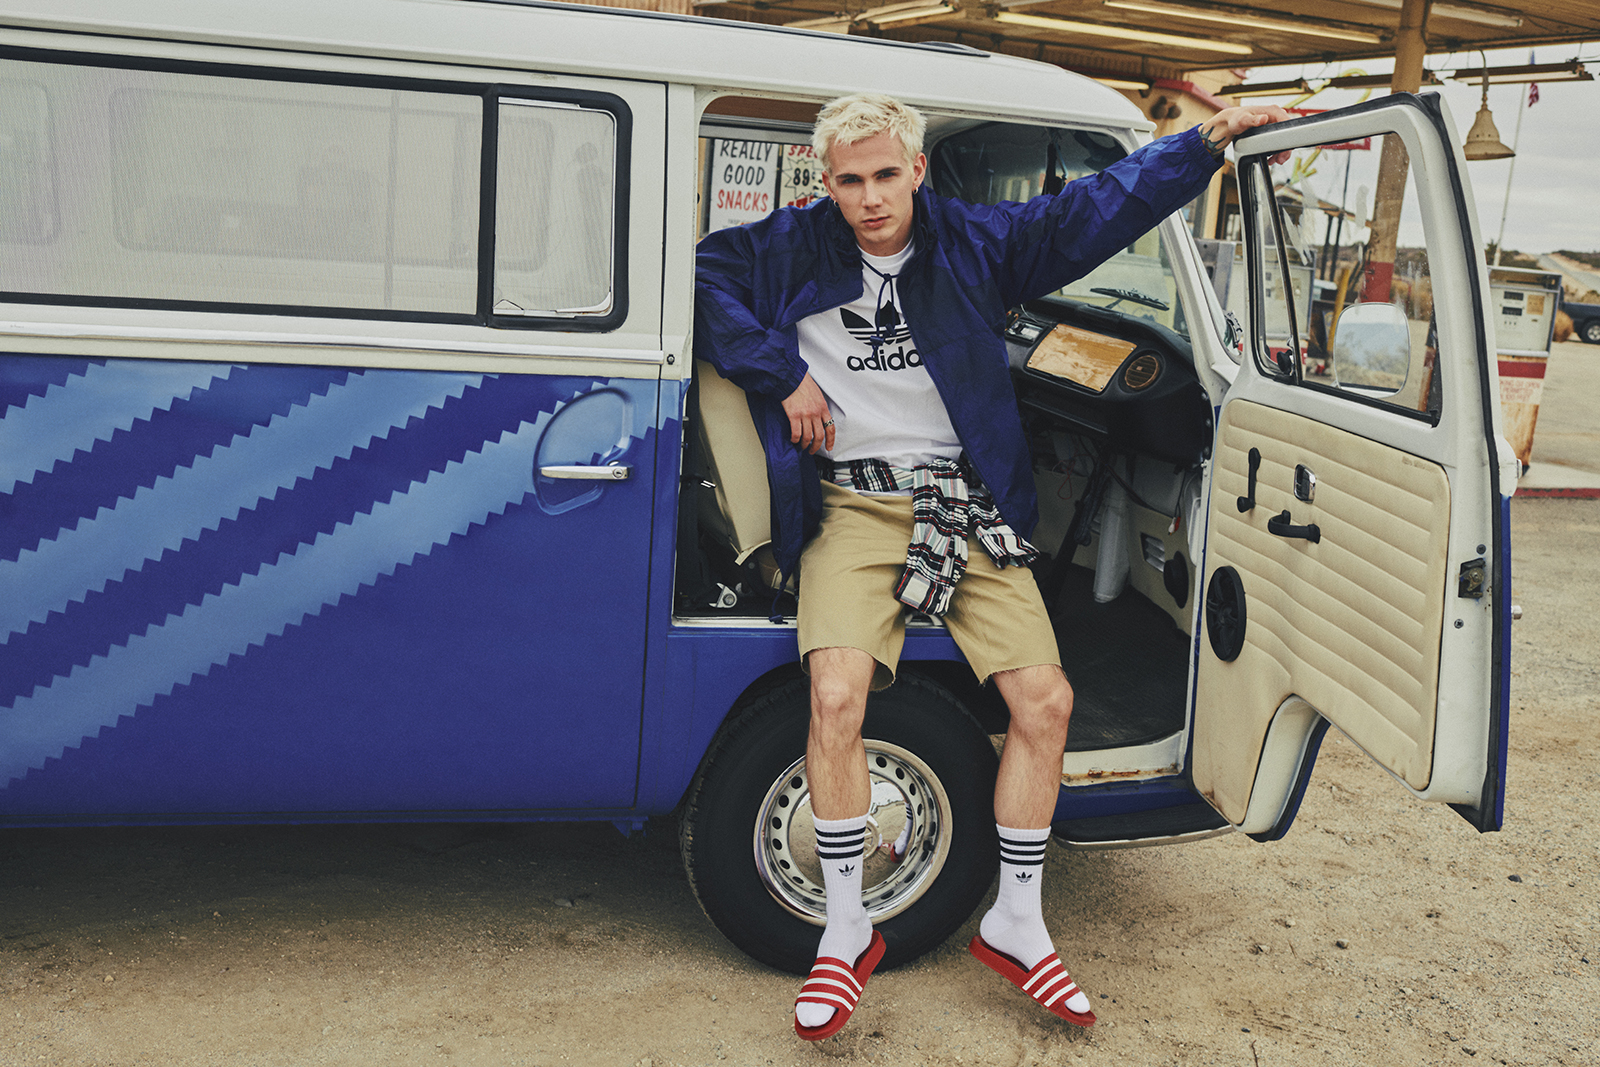 A guy wearing a blue windbreaker, adidas tee, socks, and slides leans in the open door on the passenger side of an Originals themed Volkswagen bus parked in a desert gas station.